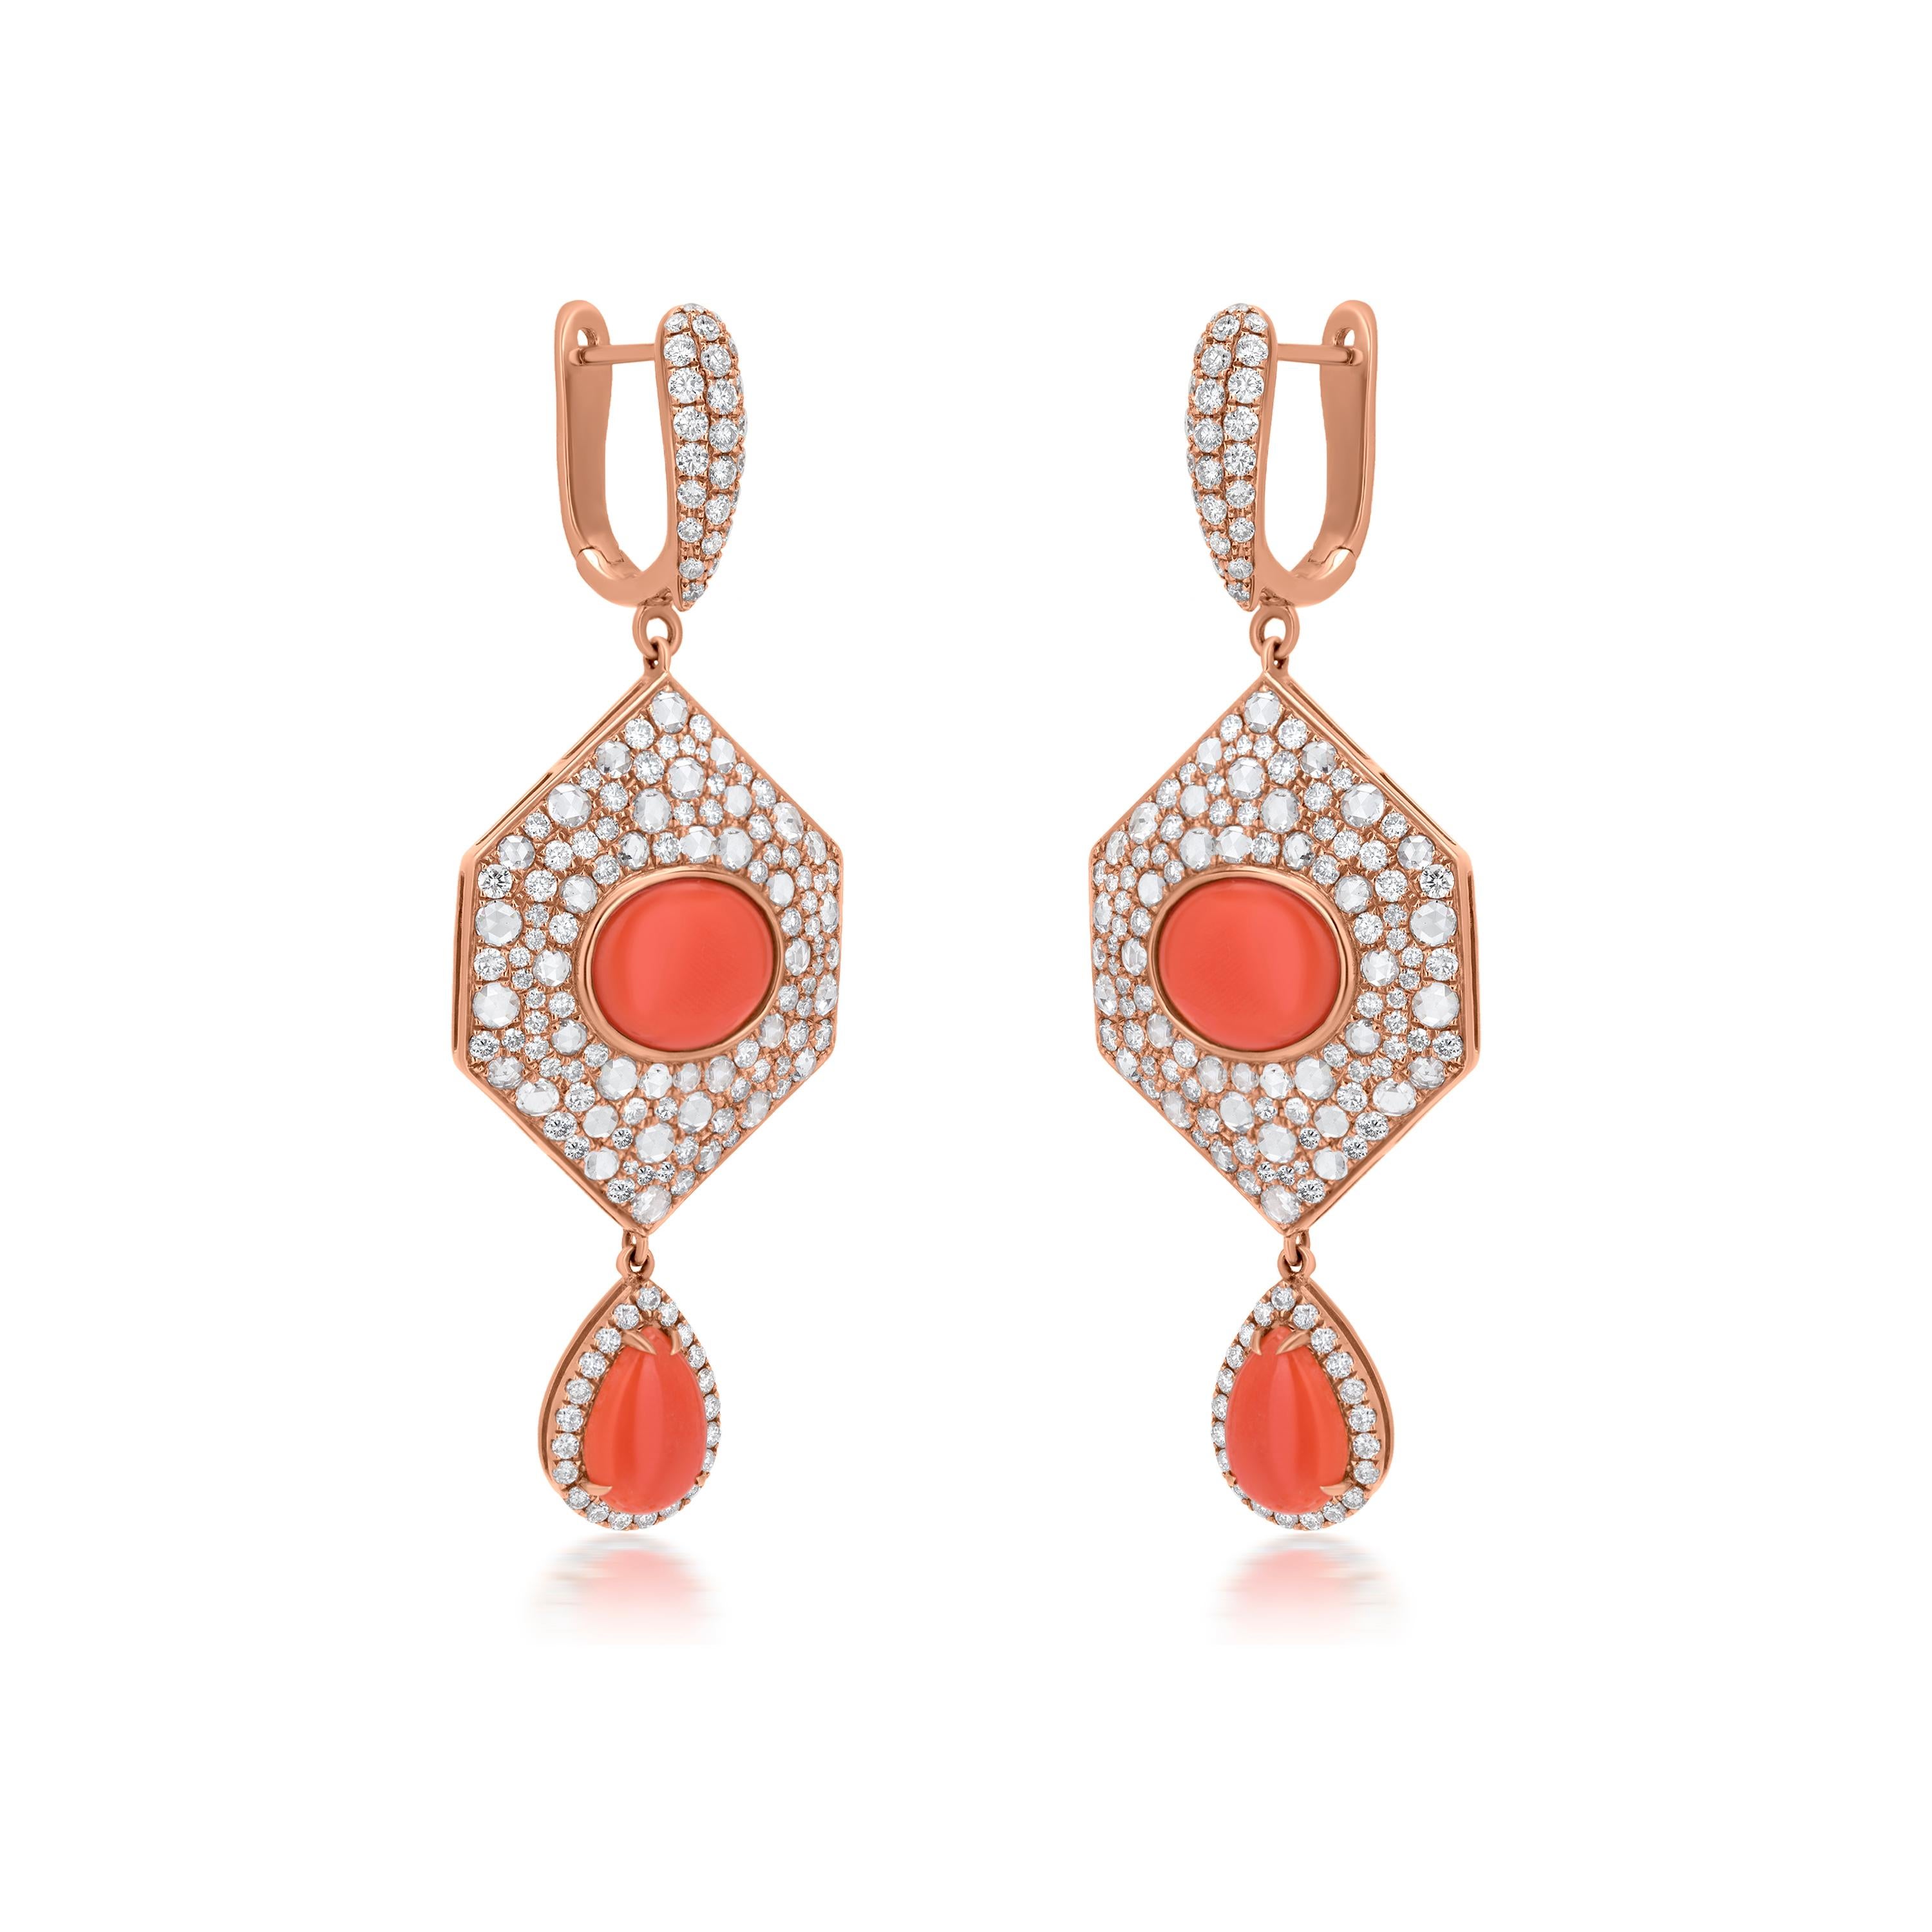 This Nigaam 18K Rose Gold earring has water-drop-shaped lower danglers featuring two pear-cabochon Red Coral stones in a prong setting, weighing 2.06 Cts. The center body of the earring looks like two glistening hexagonal diamond studded plates